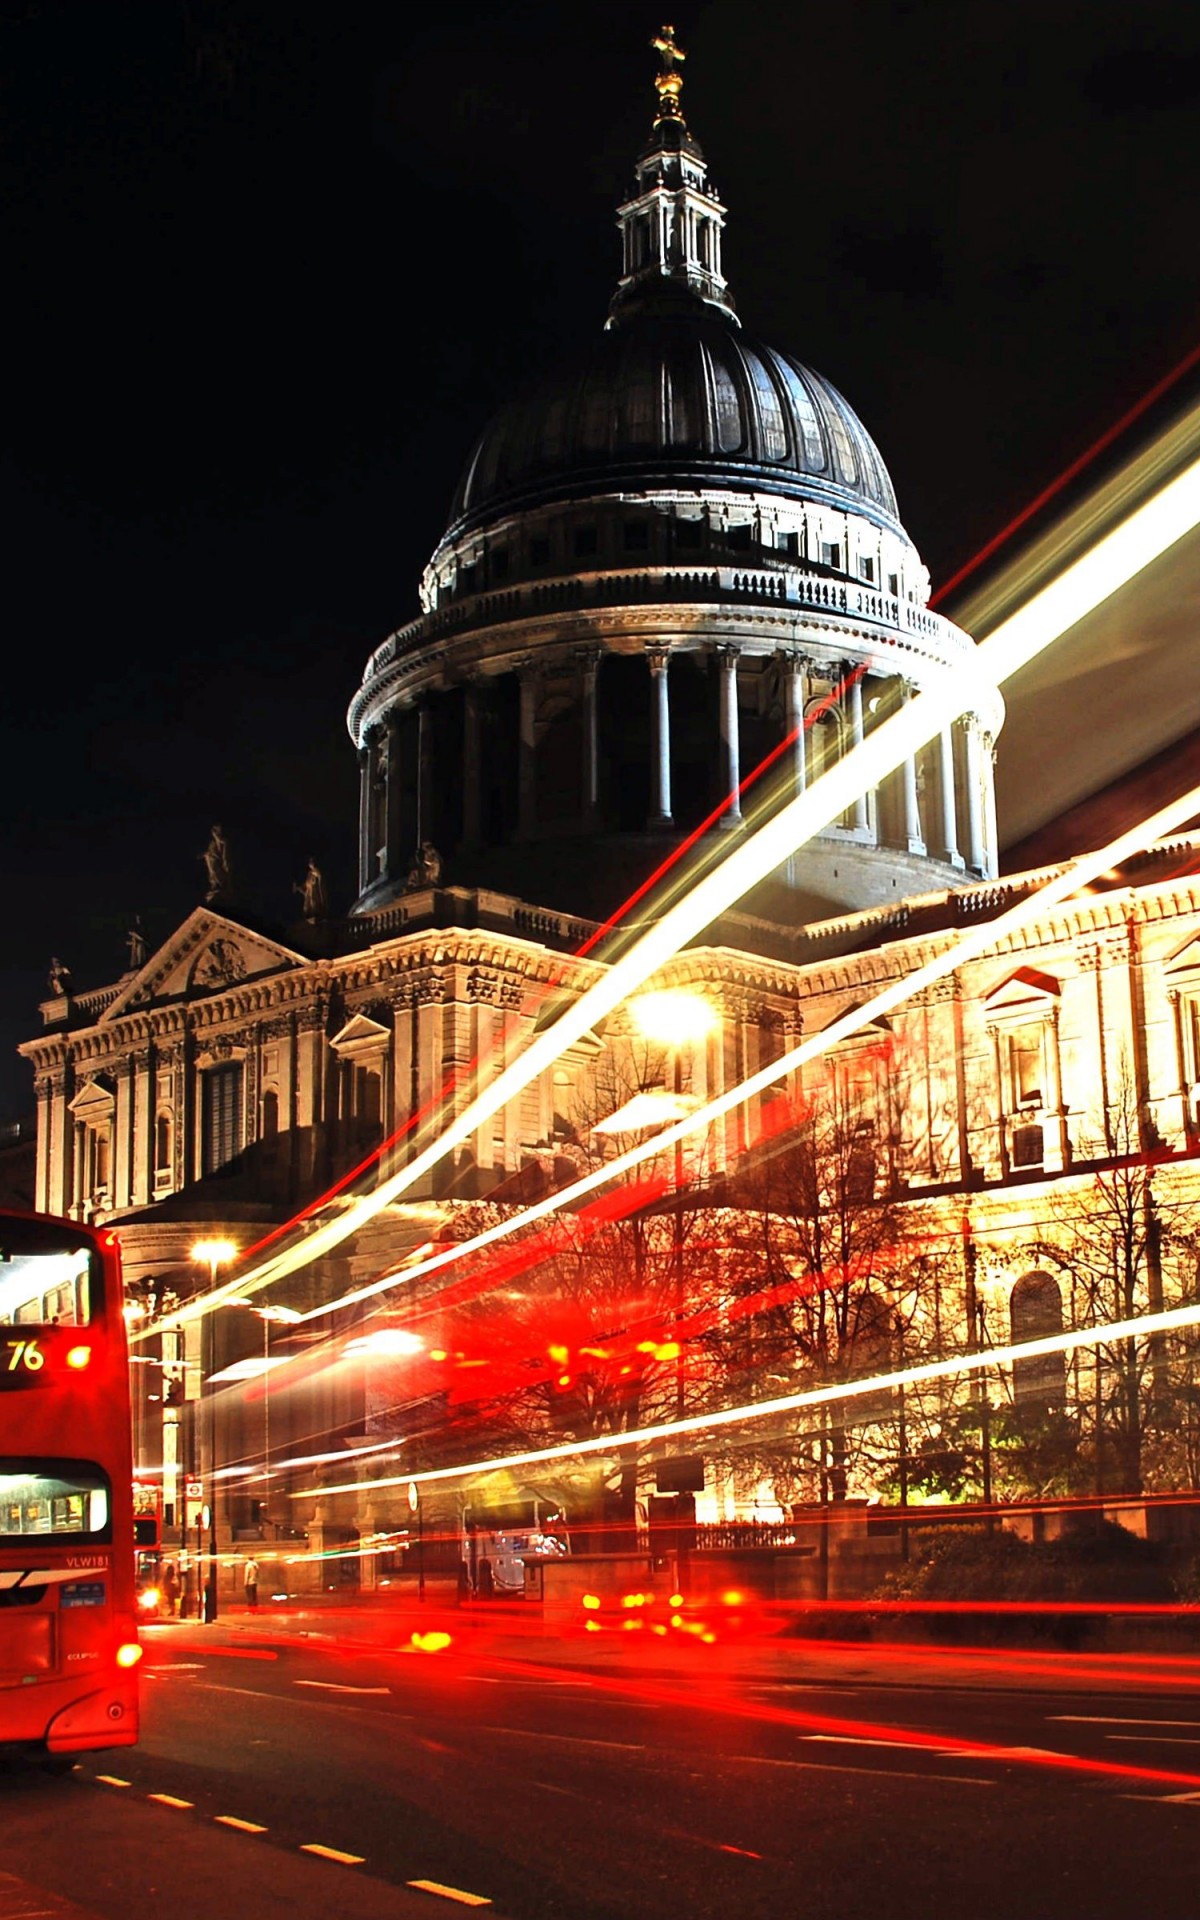 St. Paul's Cathedral at Night Wallpaper for Amazon Kindle Fire HDX